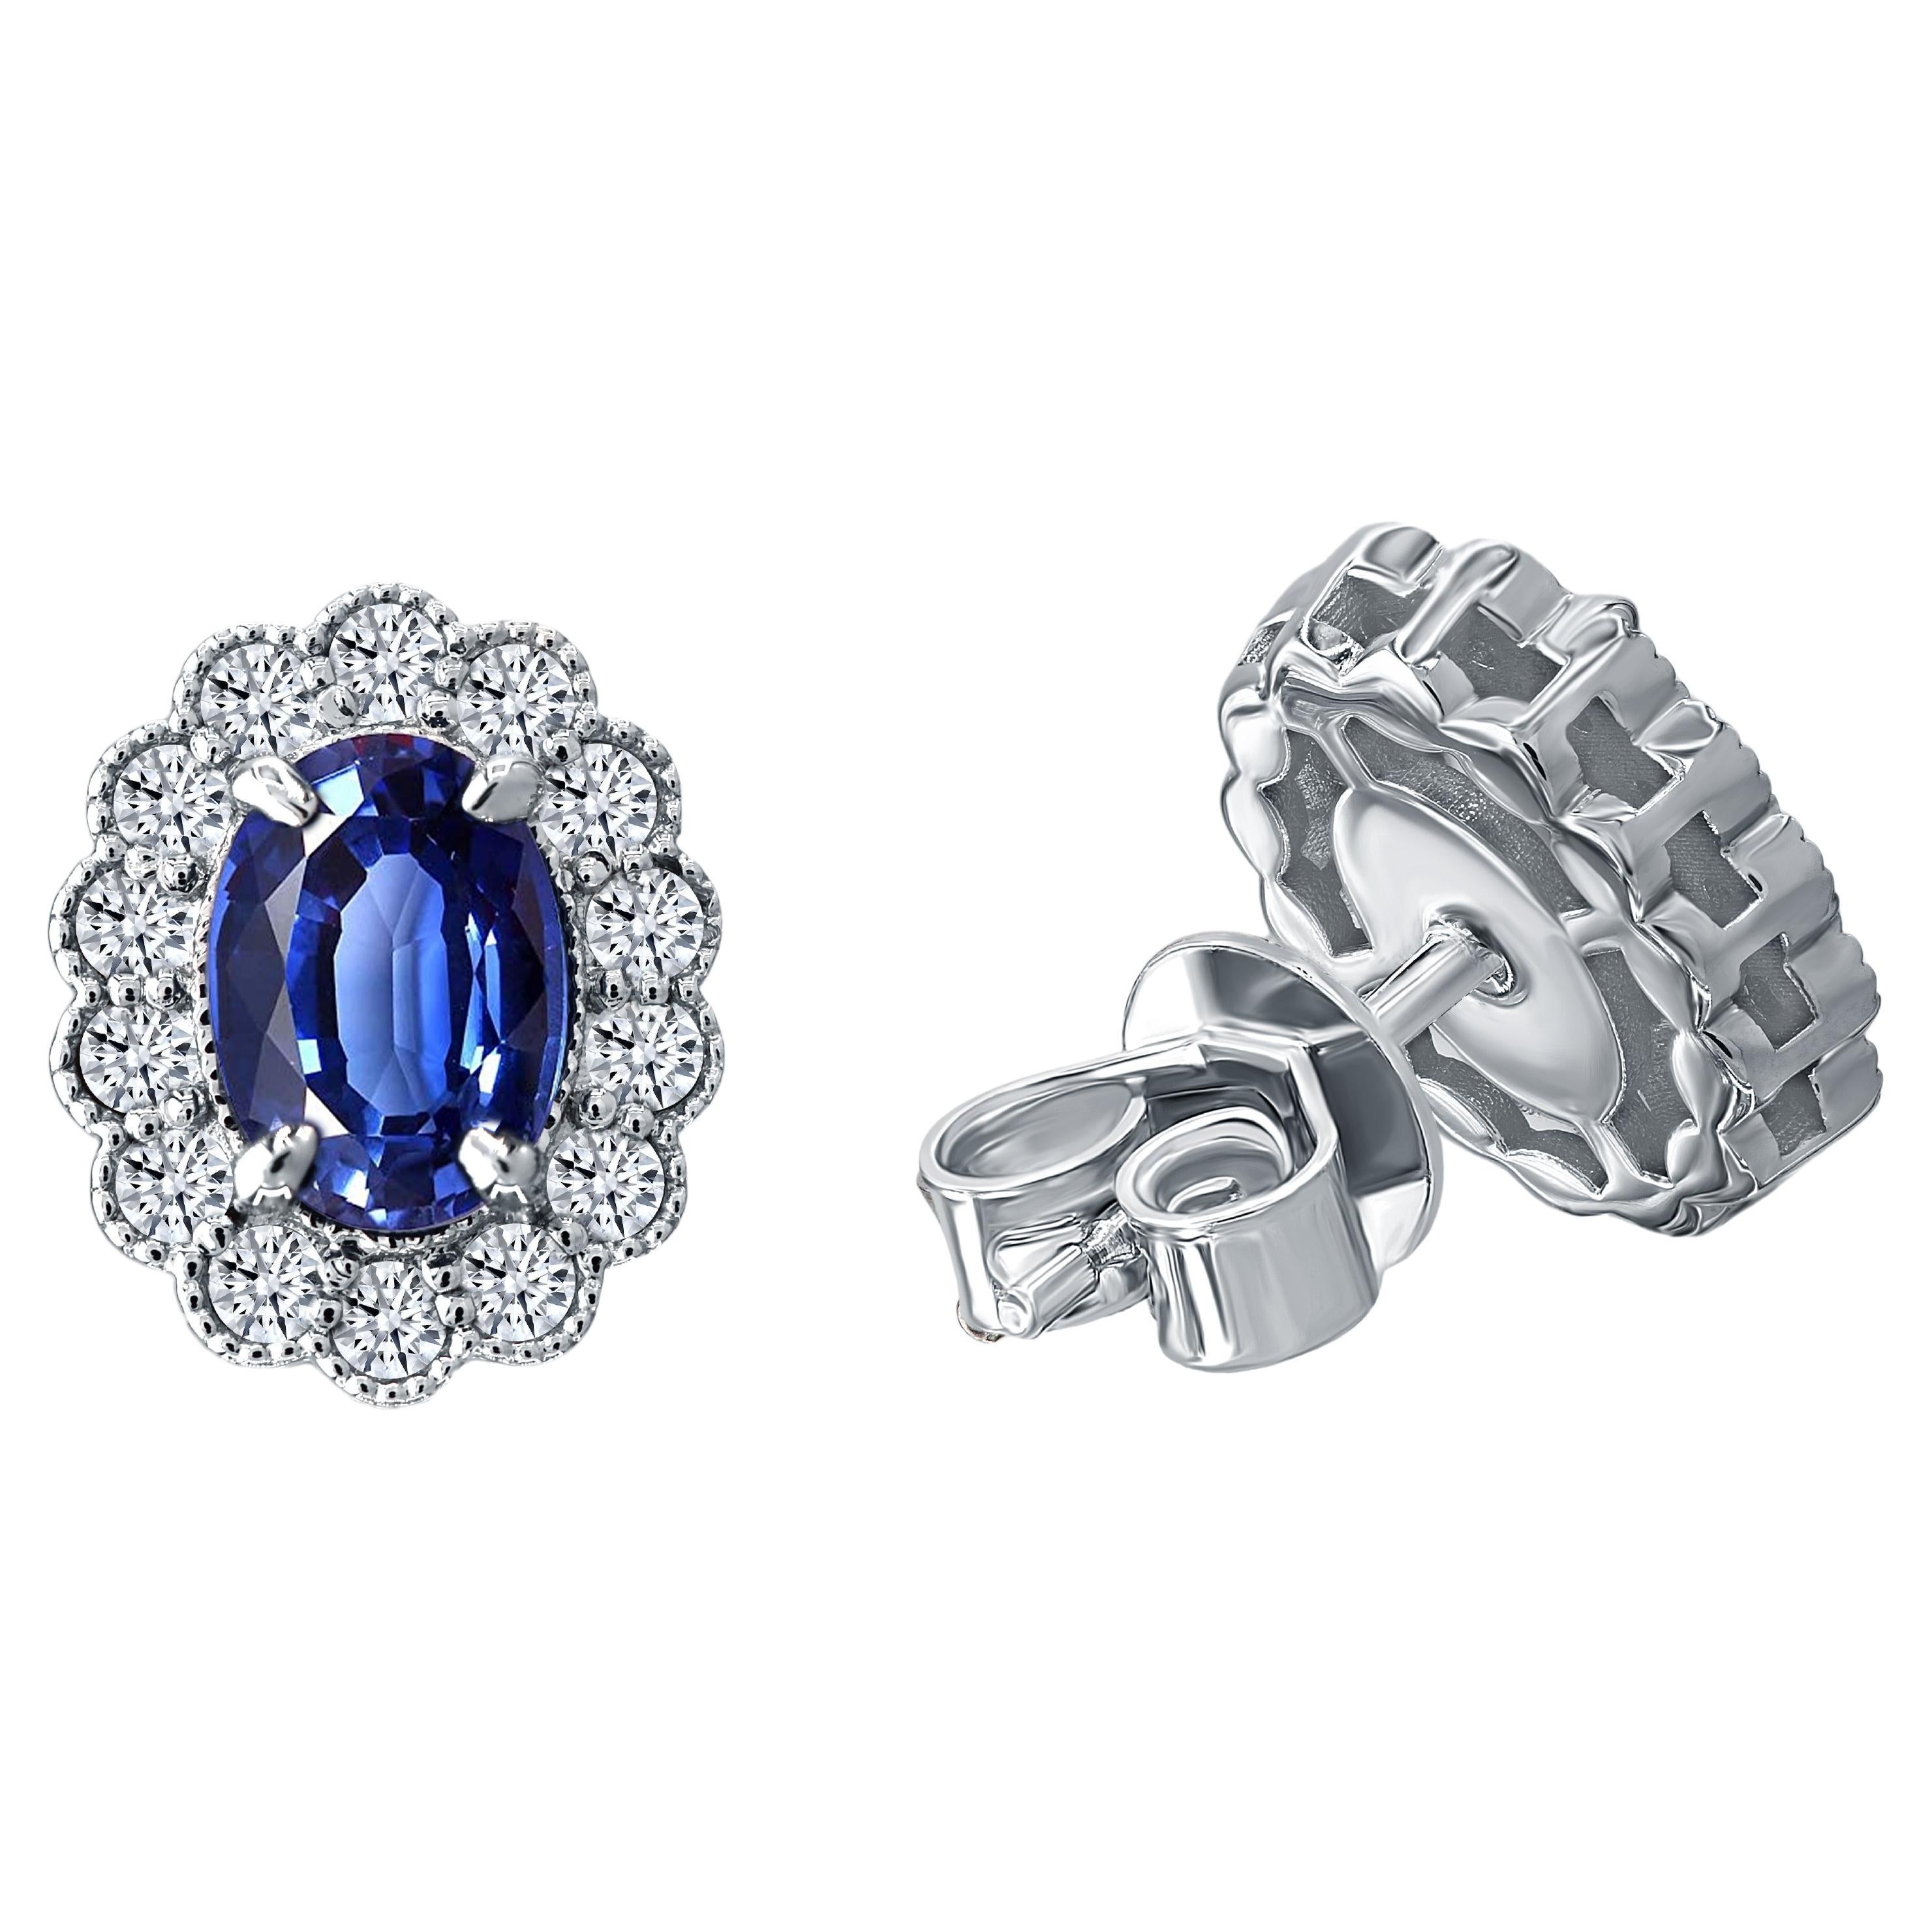 1.66 Ct Oval Blue Sapphire and 0.45 Carat Round Natural Diamond Earrings ref1960 For Sale